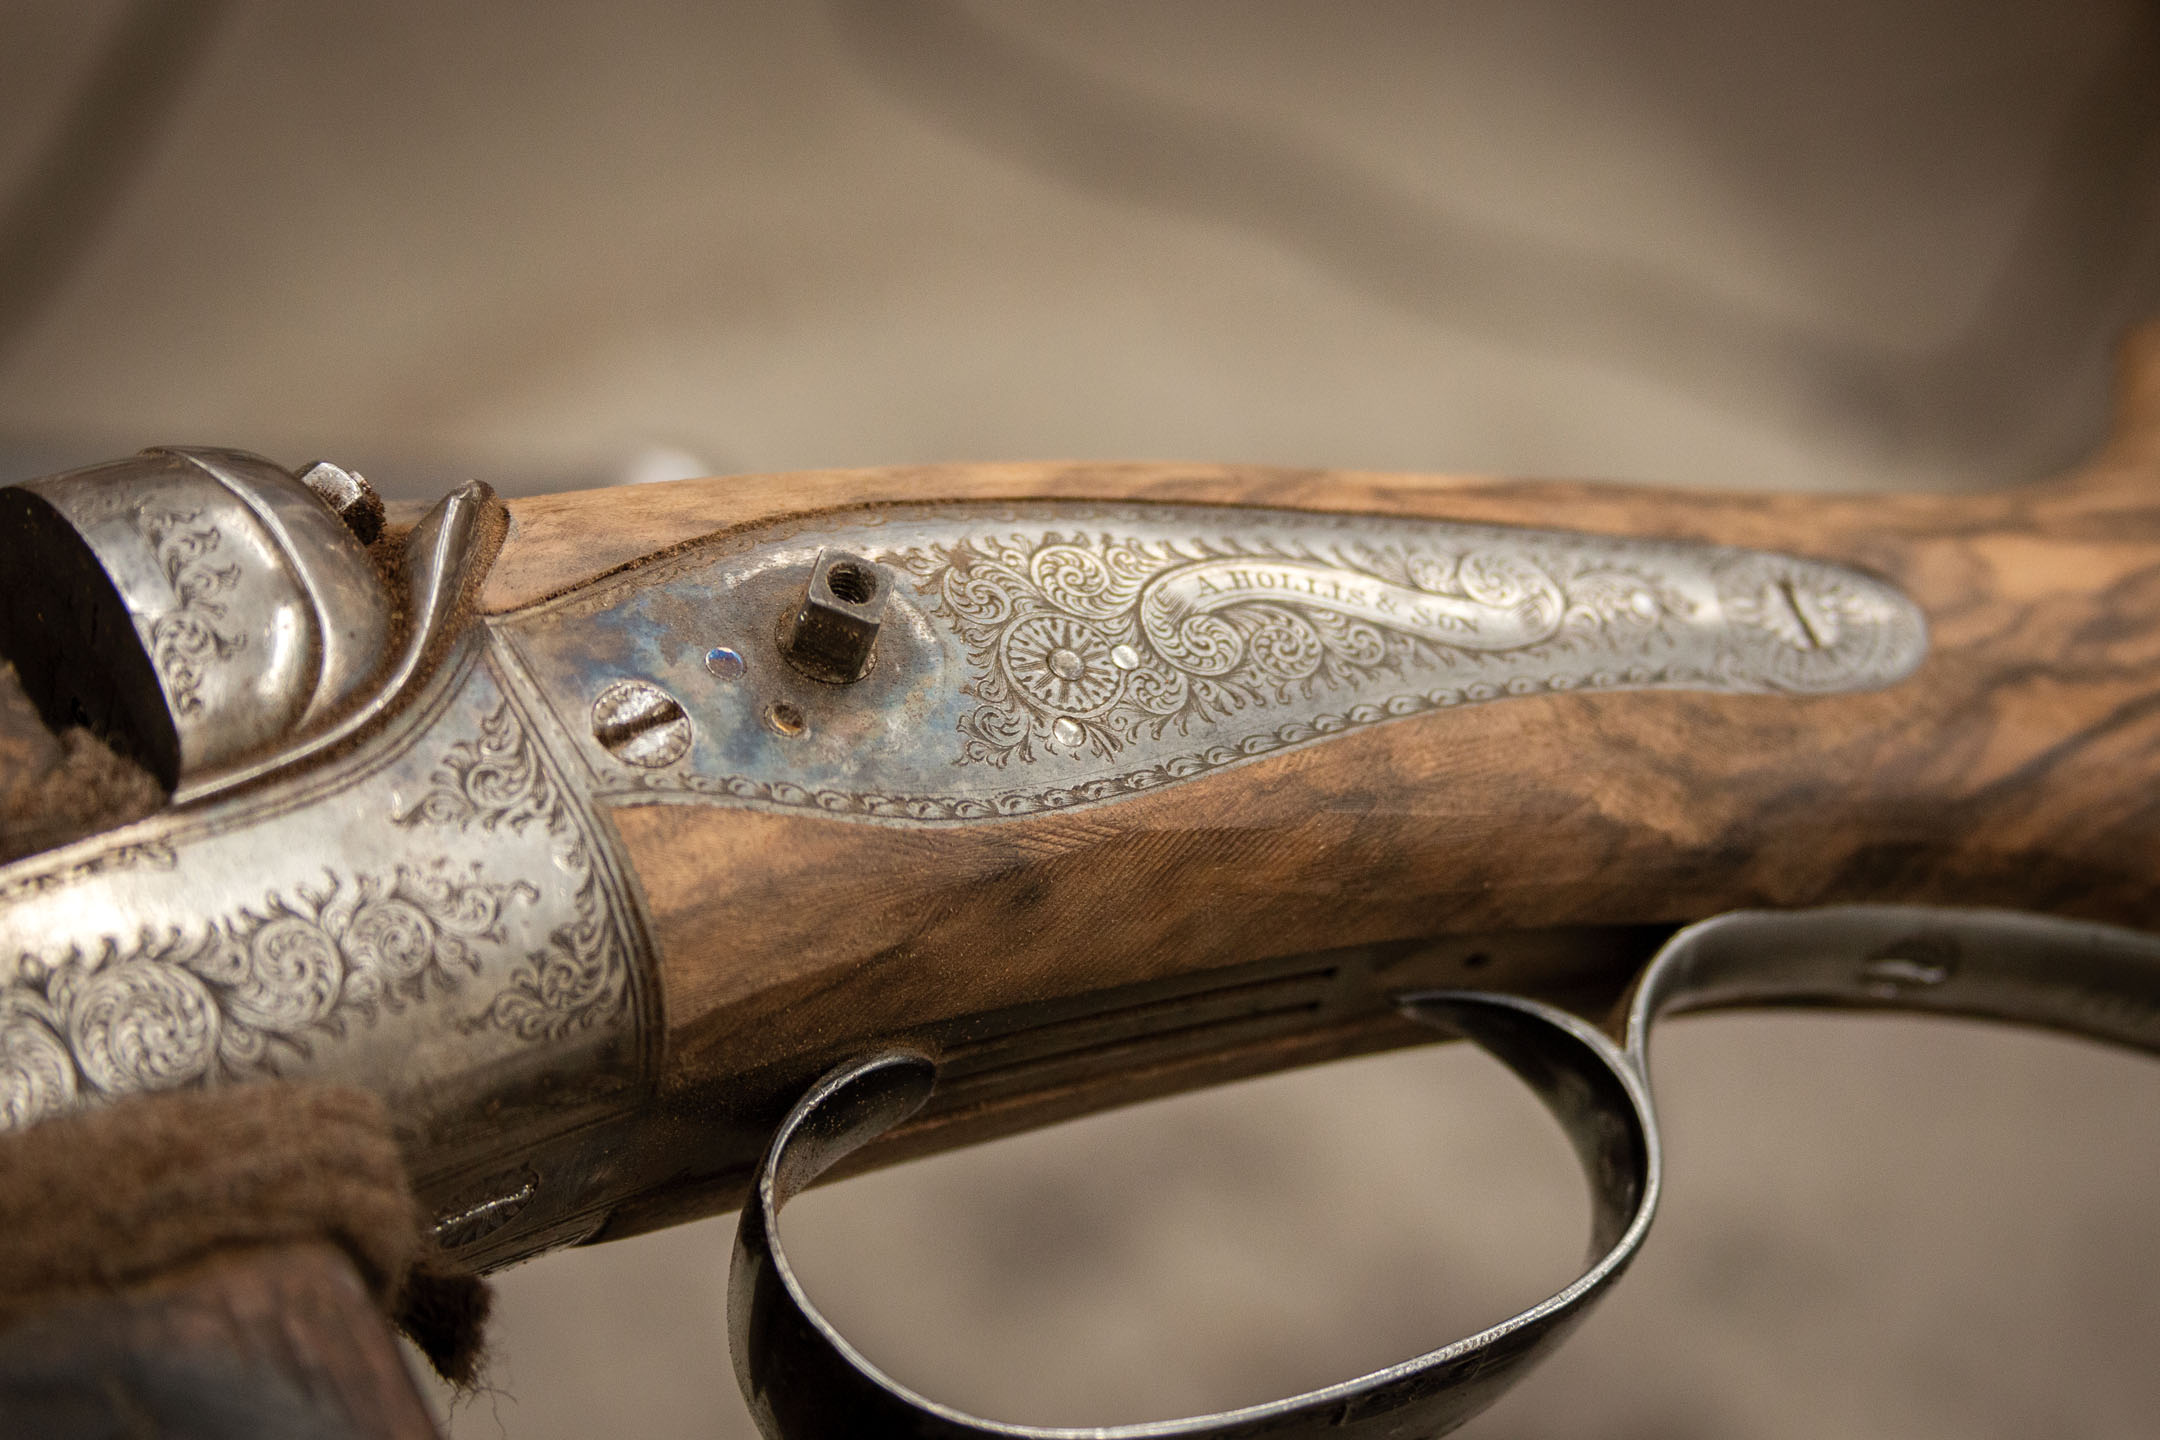 Inletting work performed during an A. Hollis & Son double rifle restoration project